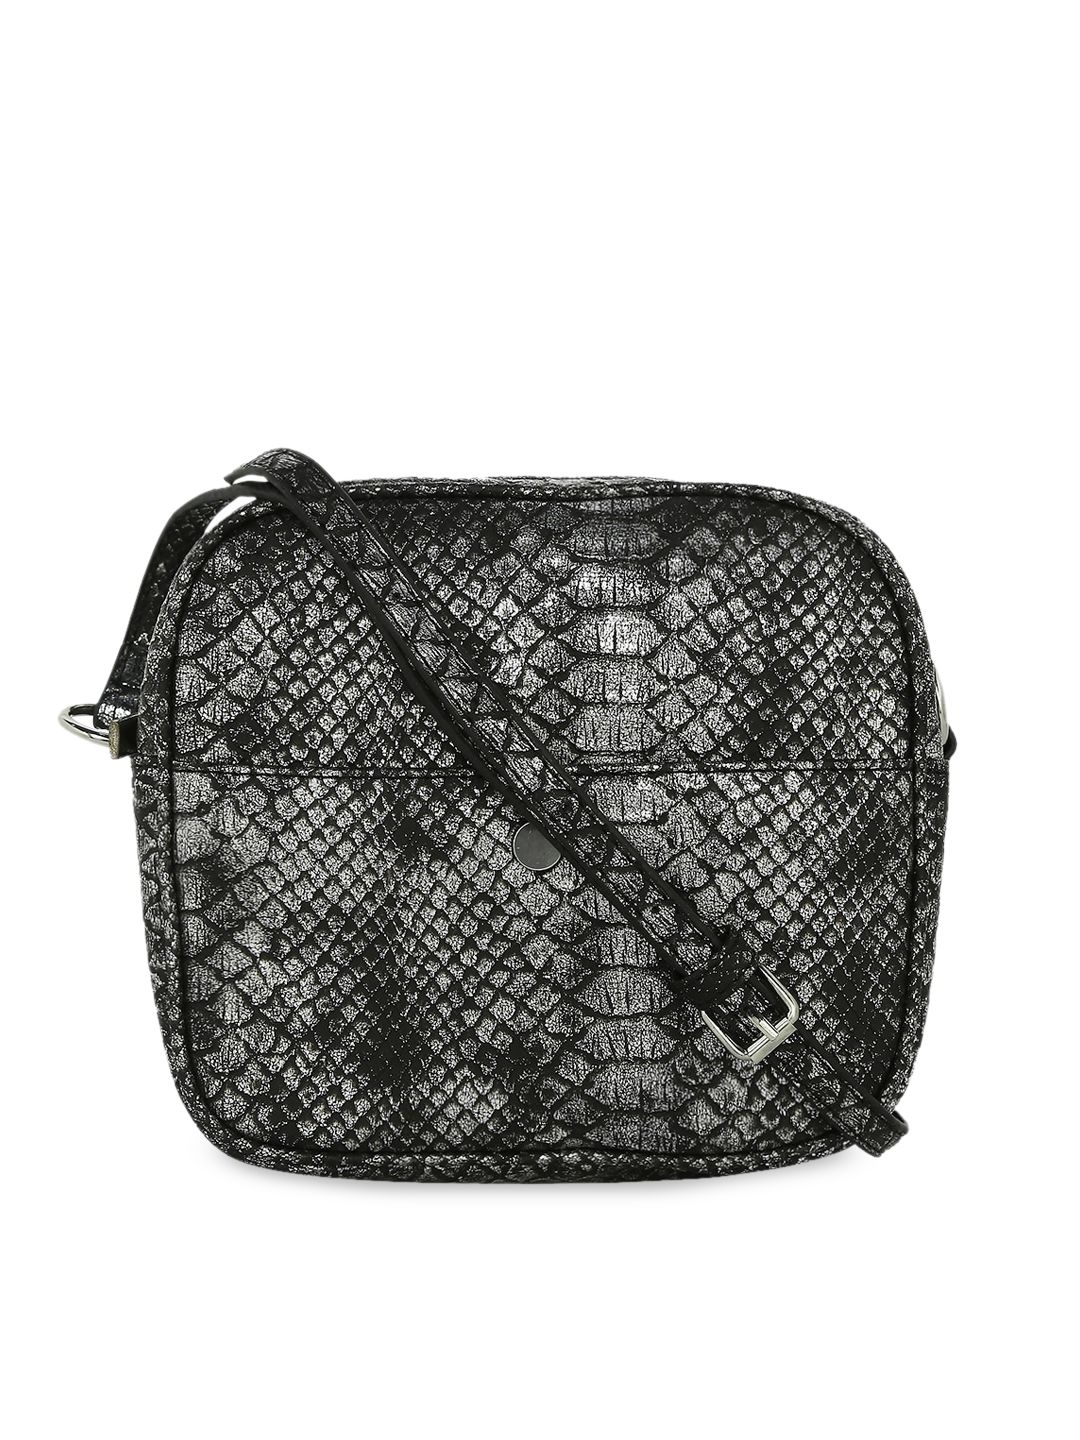 SATCHEL Black Animal Textured PU Structured Sling Bag Price in India